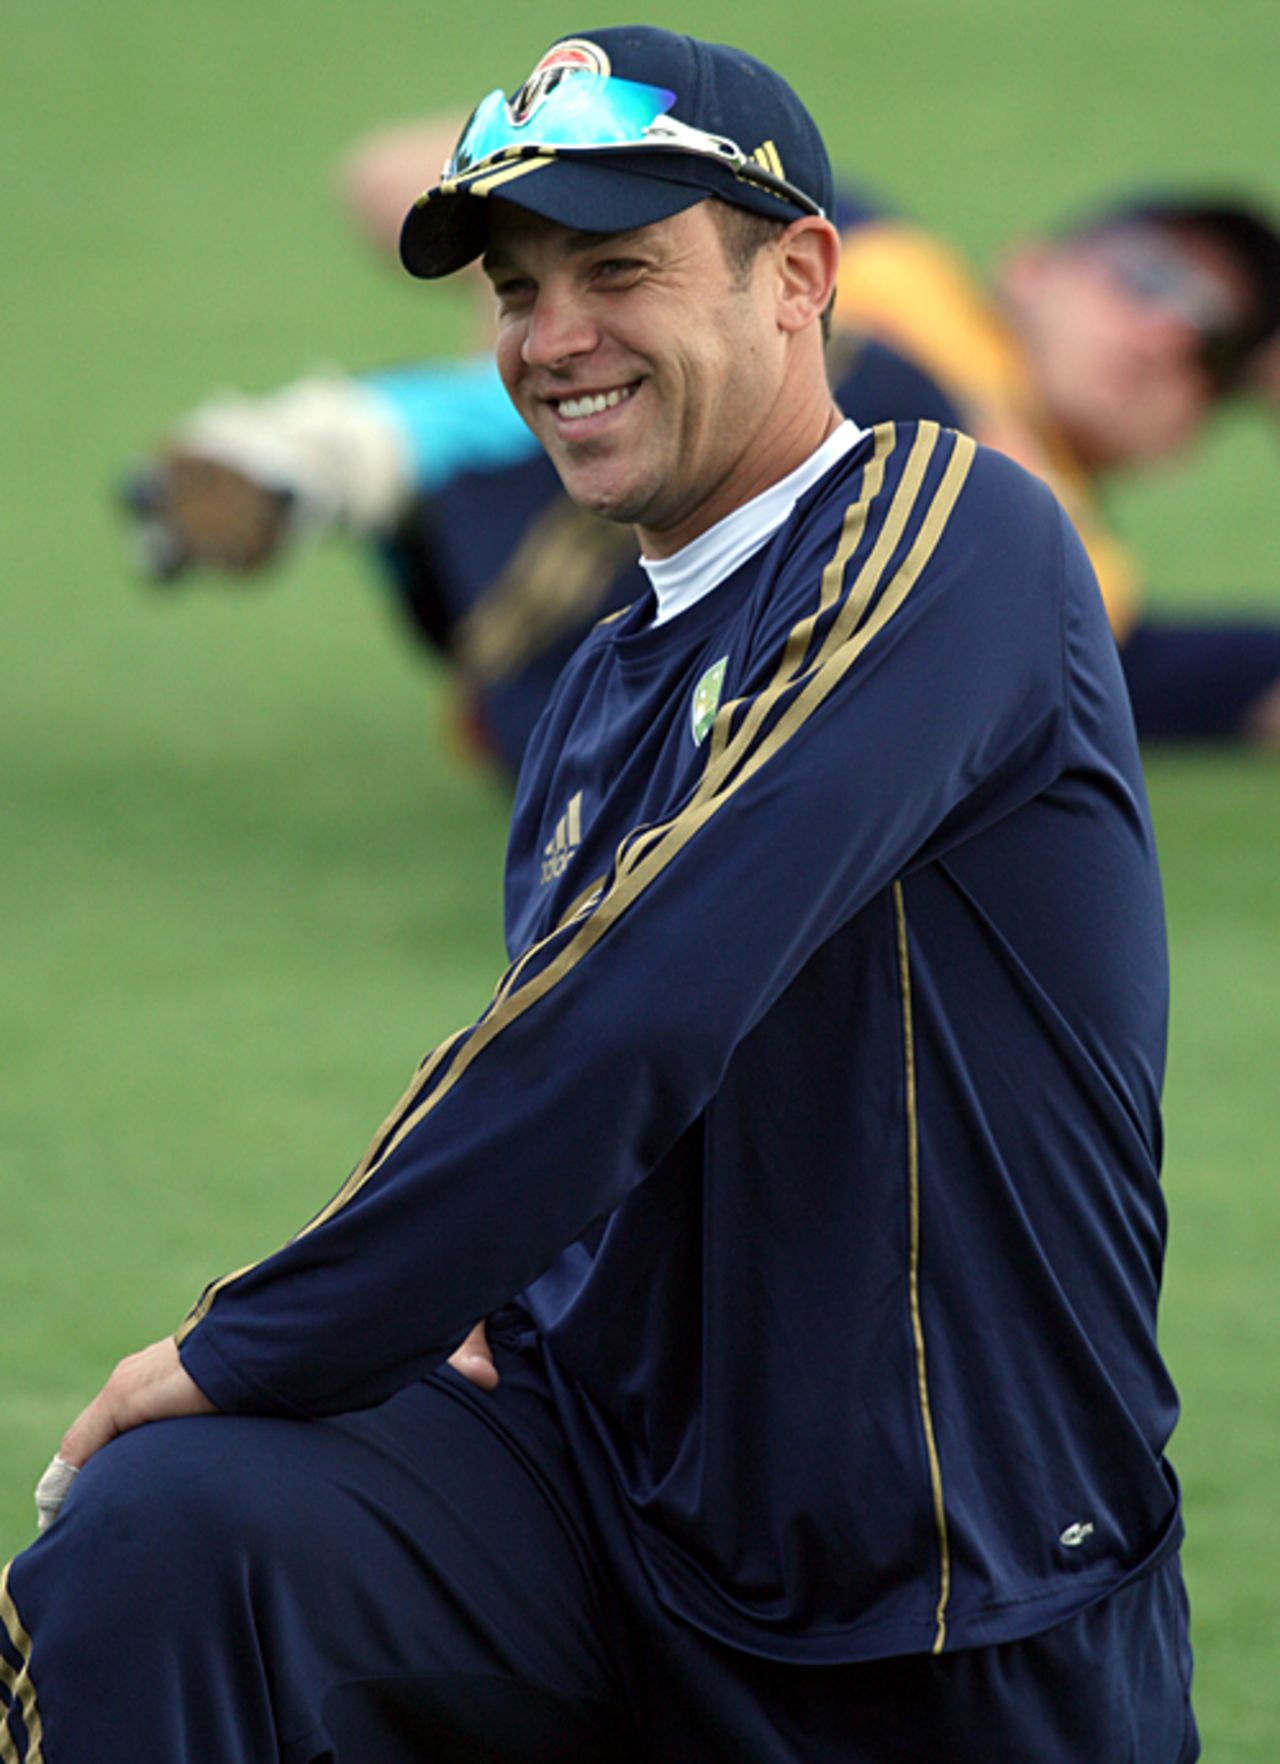 Graham Manou stretches ahead of a nets session, England v Australia, 1st Test, Cardiff, July 7, 2009